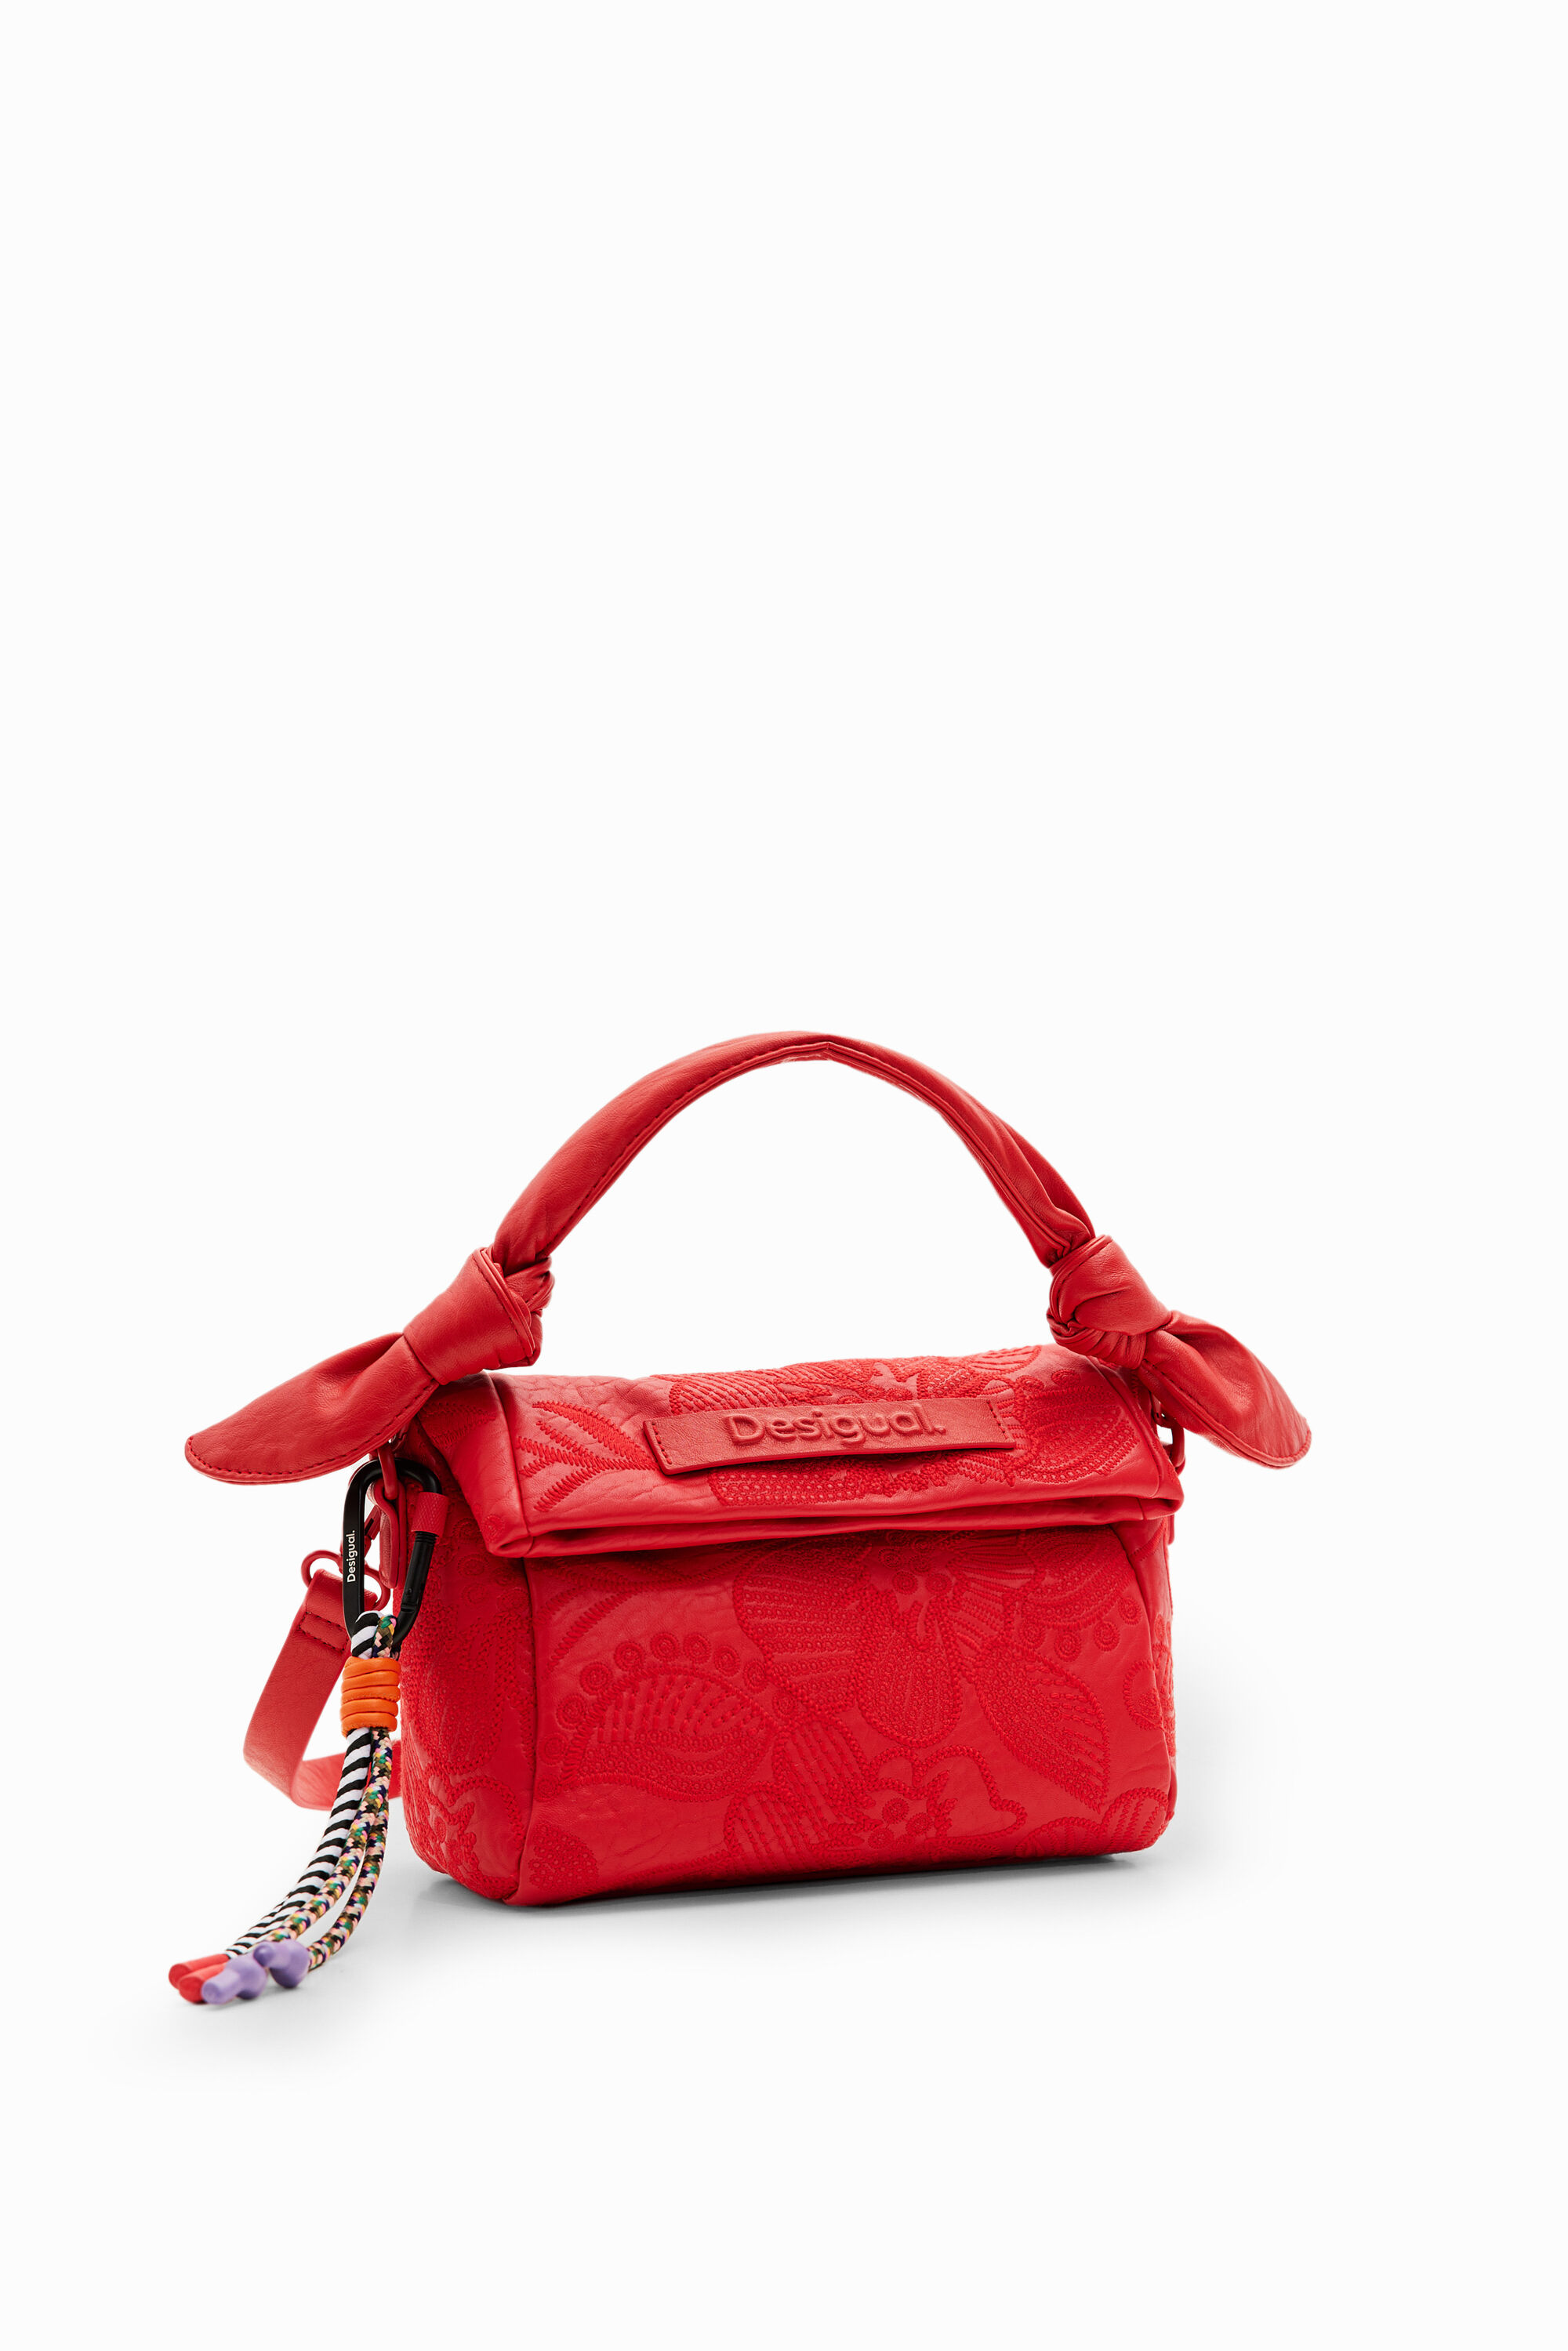 XS embroidered floral bag - RED - U